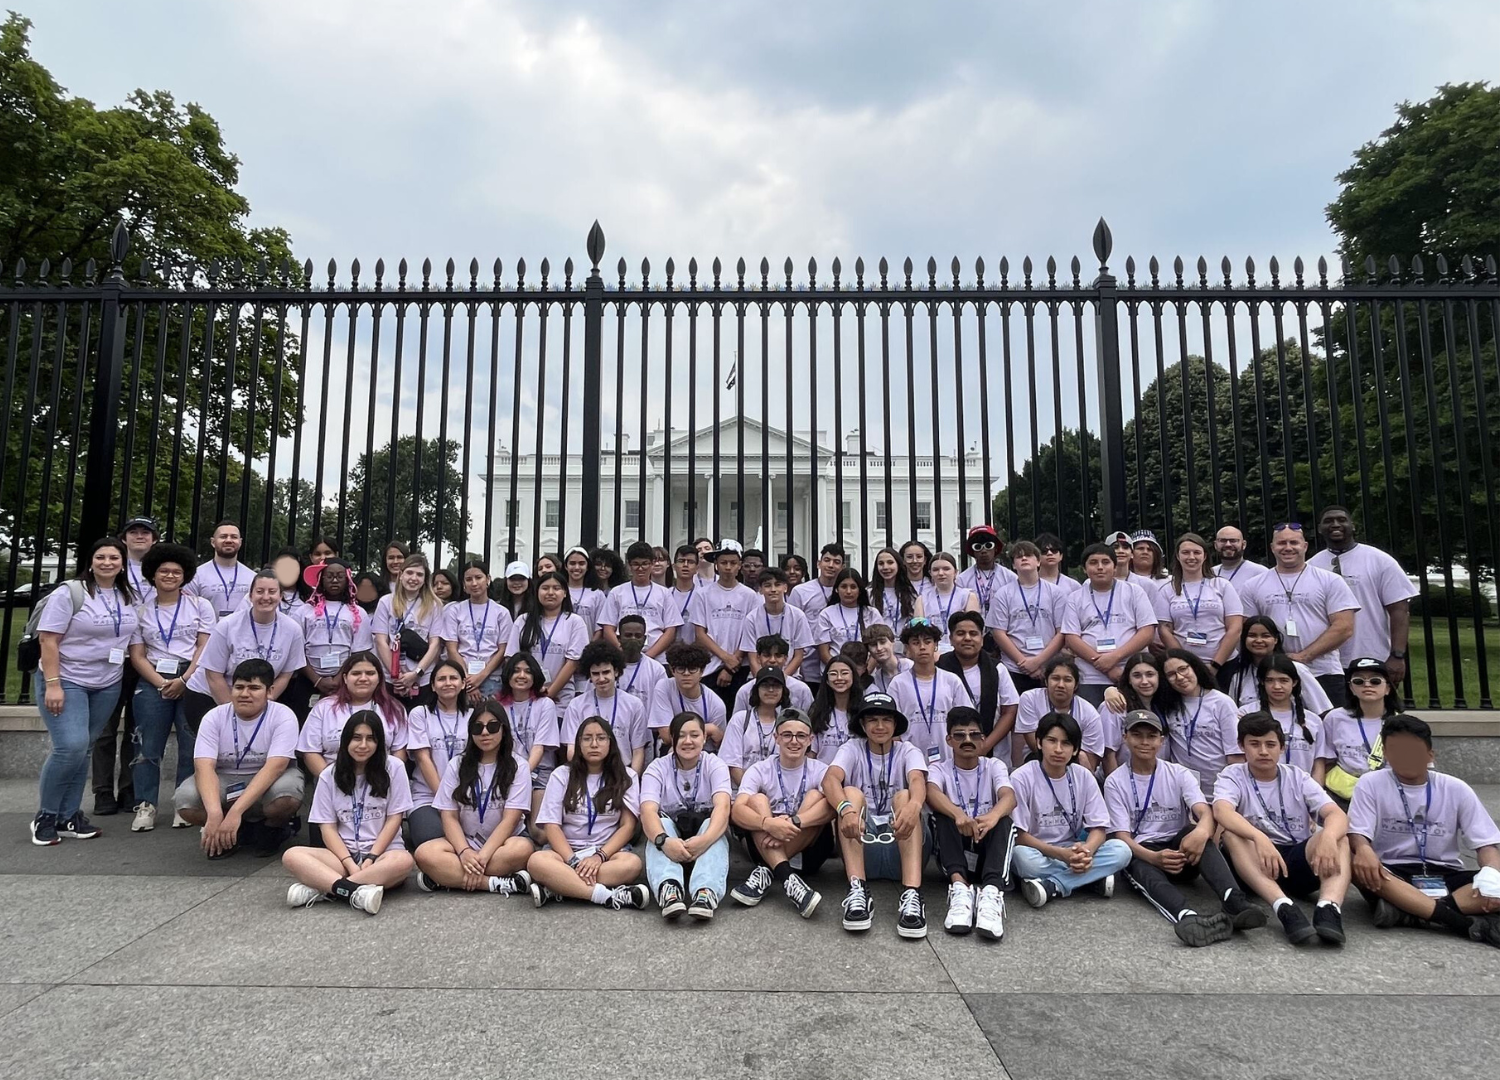 The students and chaperones pose for a photo in front of the White House.